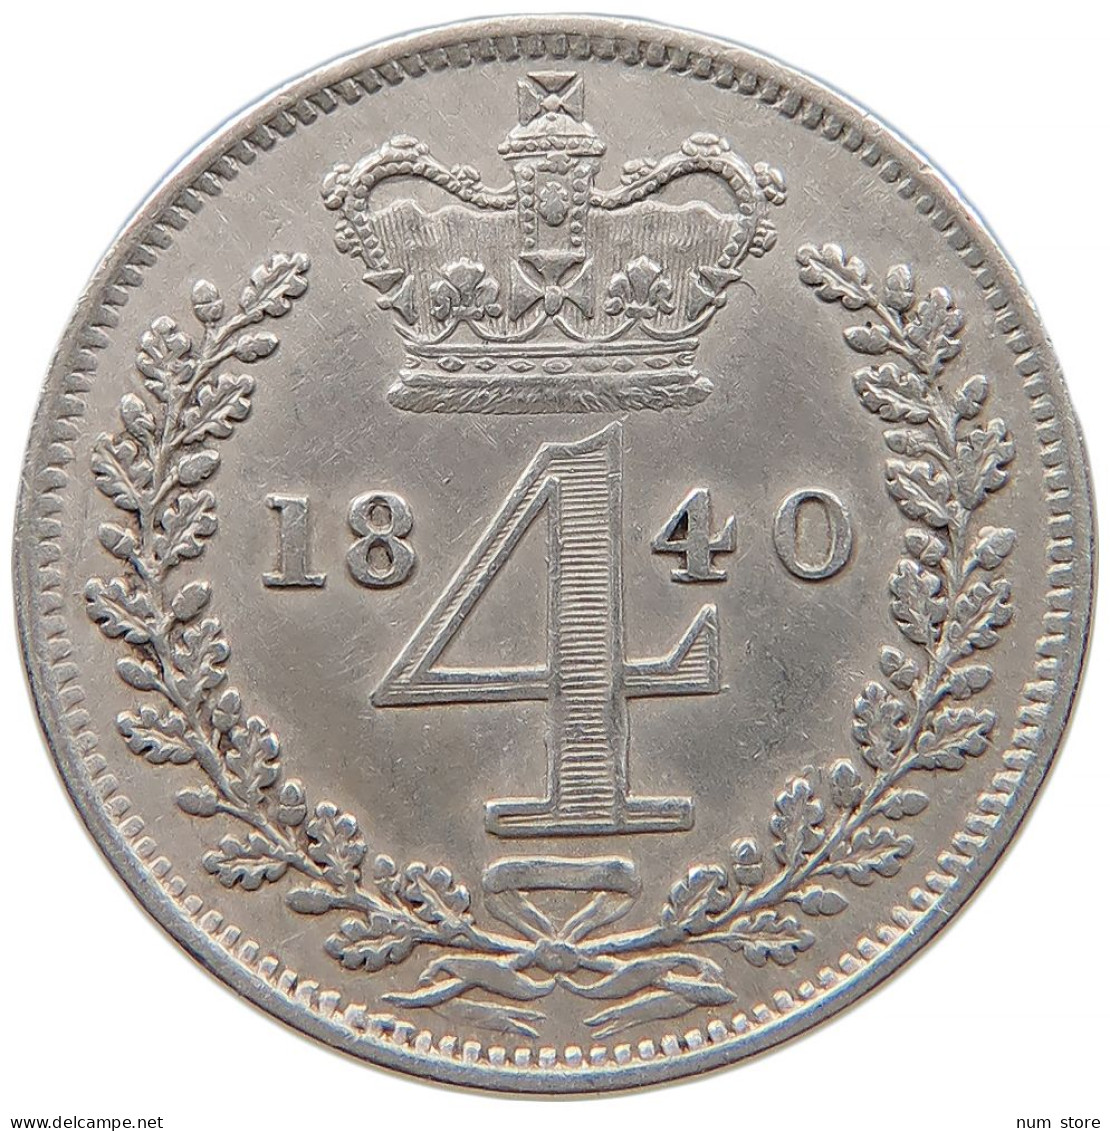 GREAT BRITAIN 4 PENCE MAUNDY 1840 Victoria 1837-1901 #t022 0547 - G. 4 Pence/ Groat